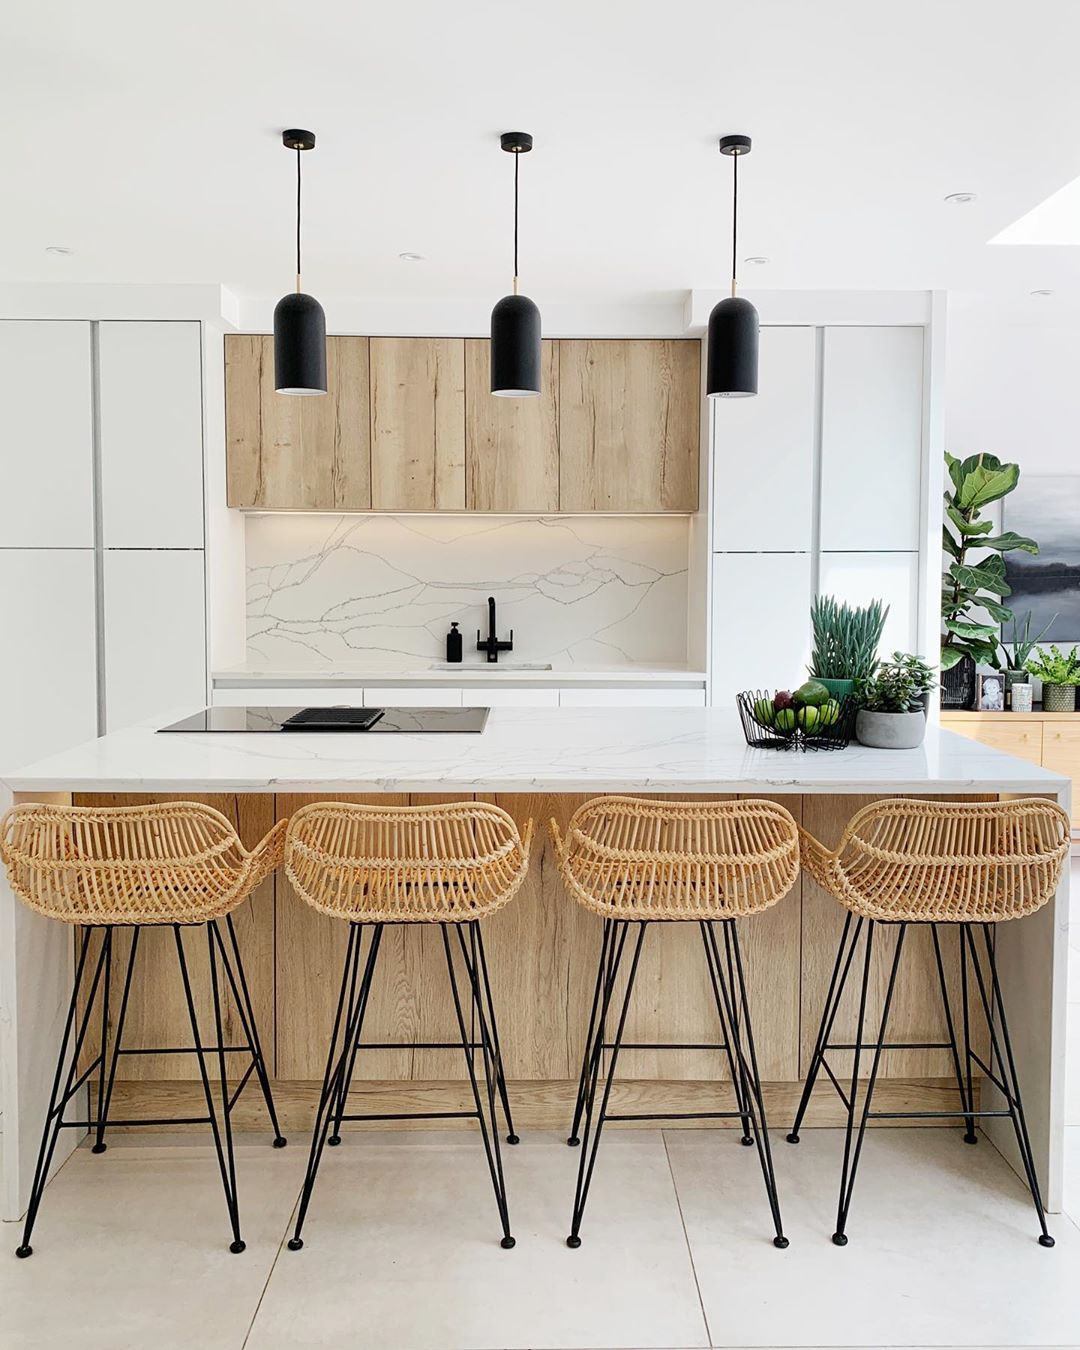 Minimalist Kitchen with Clean Island and New Overhead Lighting. Photo by Instagram user @my_fantasy_extension